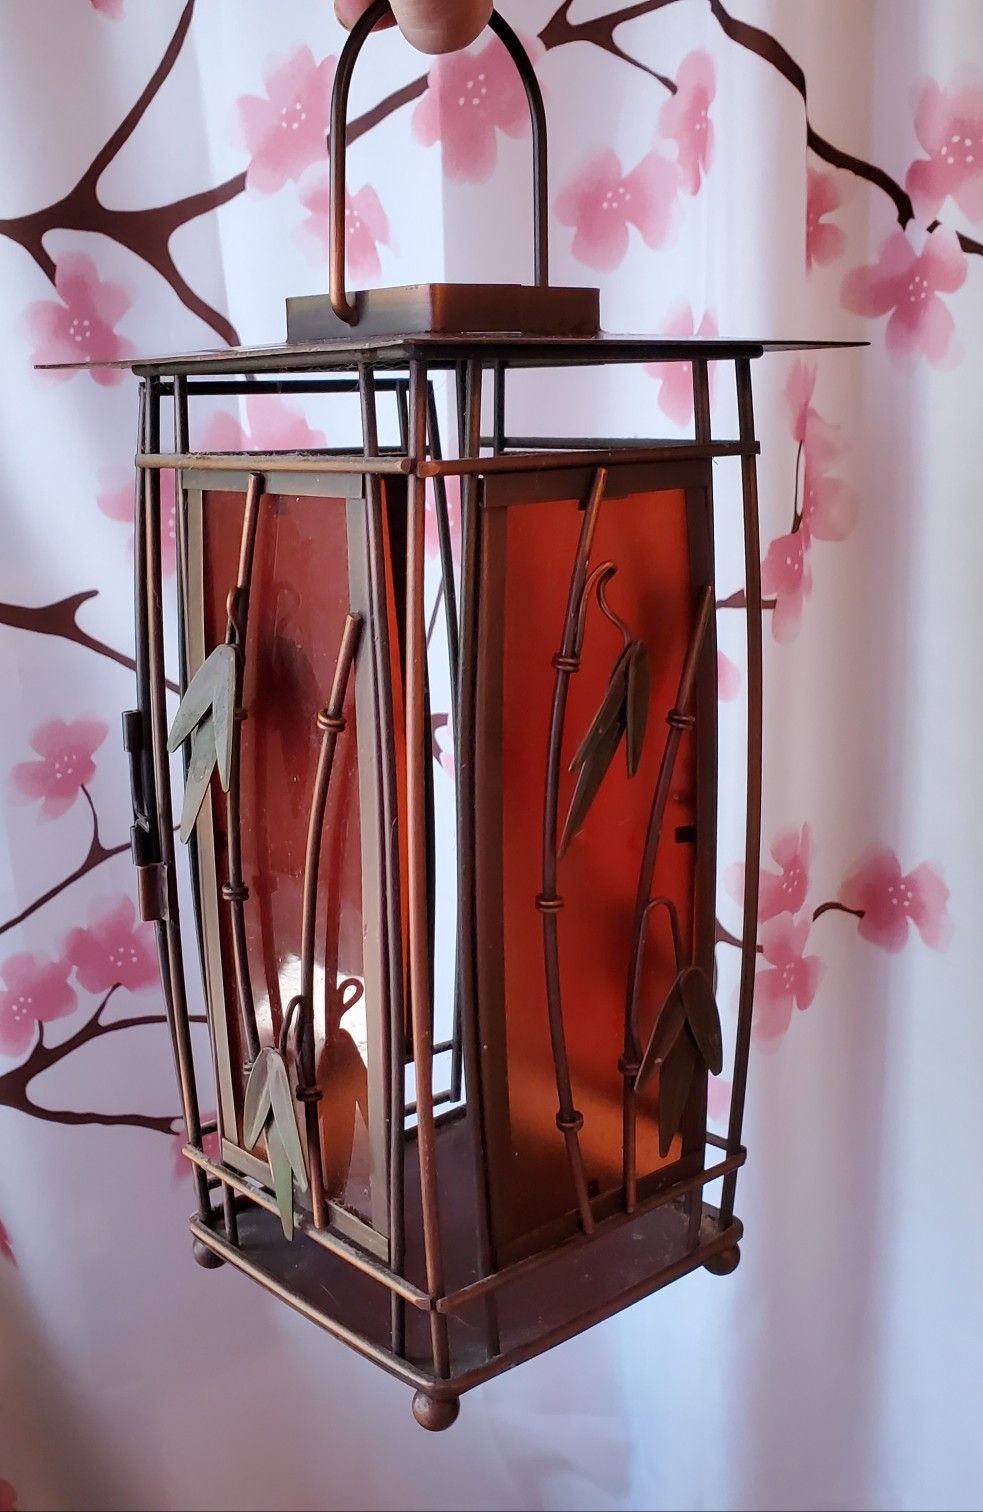 Lantern - Metal & Colored glass (opens to add light/candle)